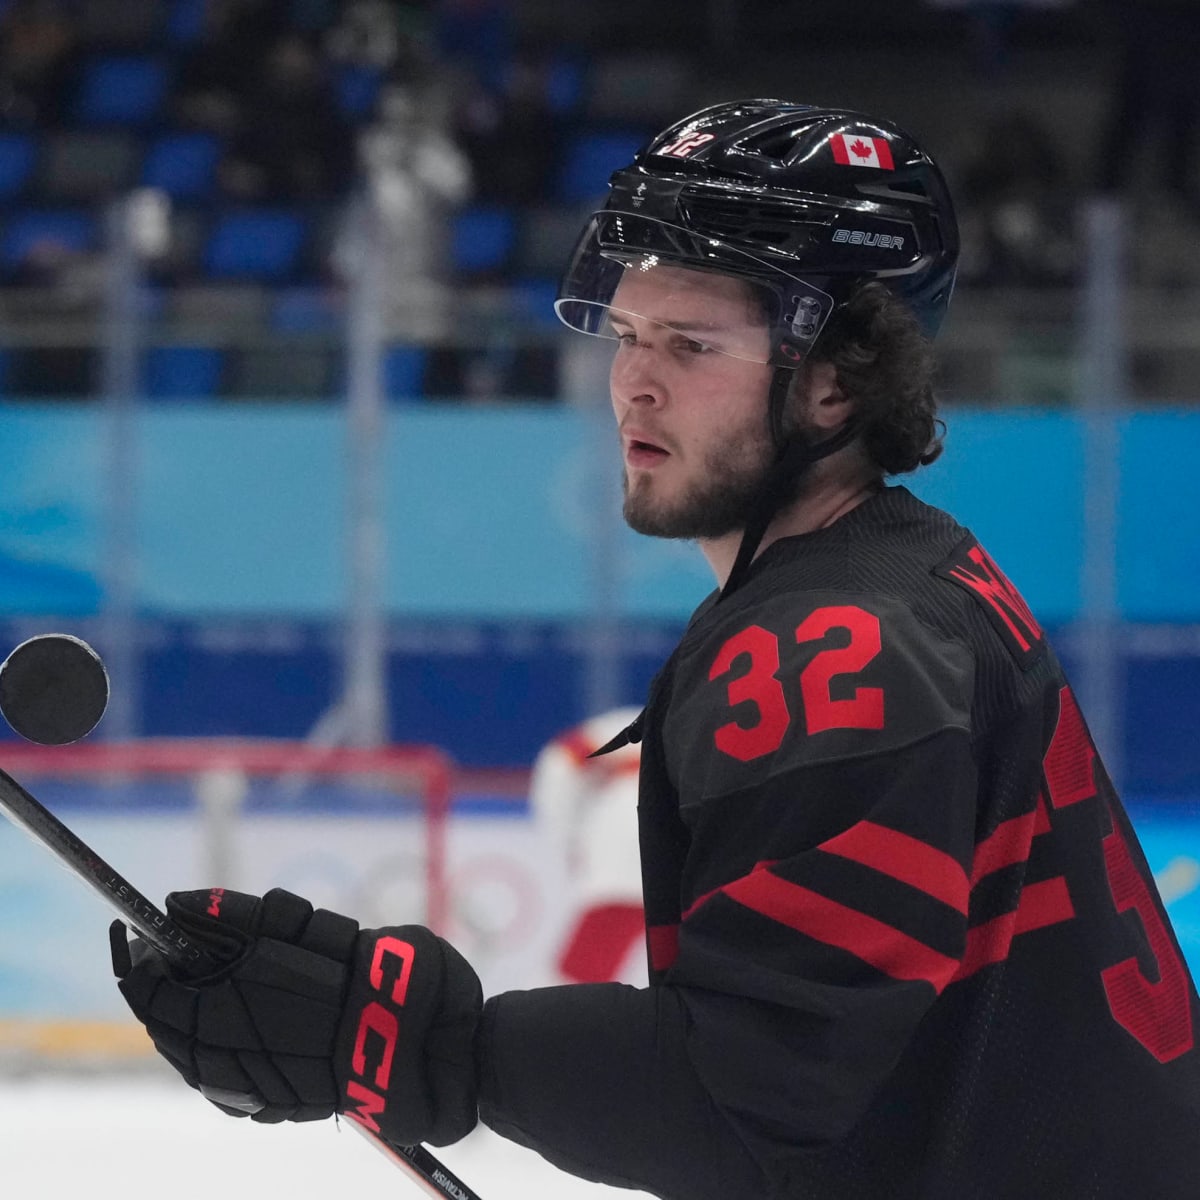 Top 20 Players to Watch at the 2022 World Junior Championship